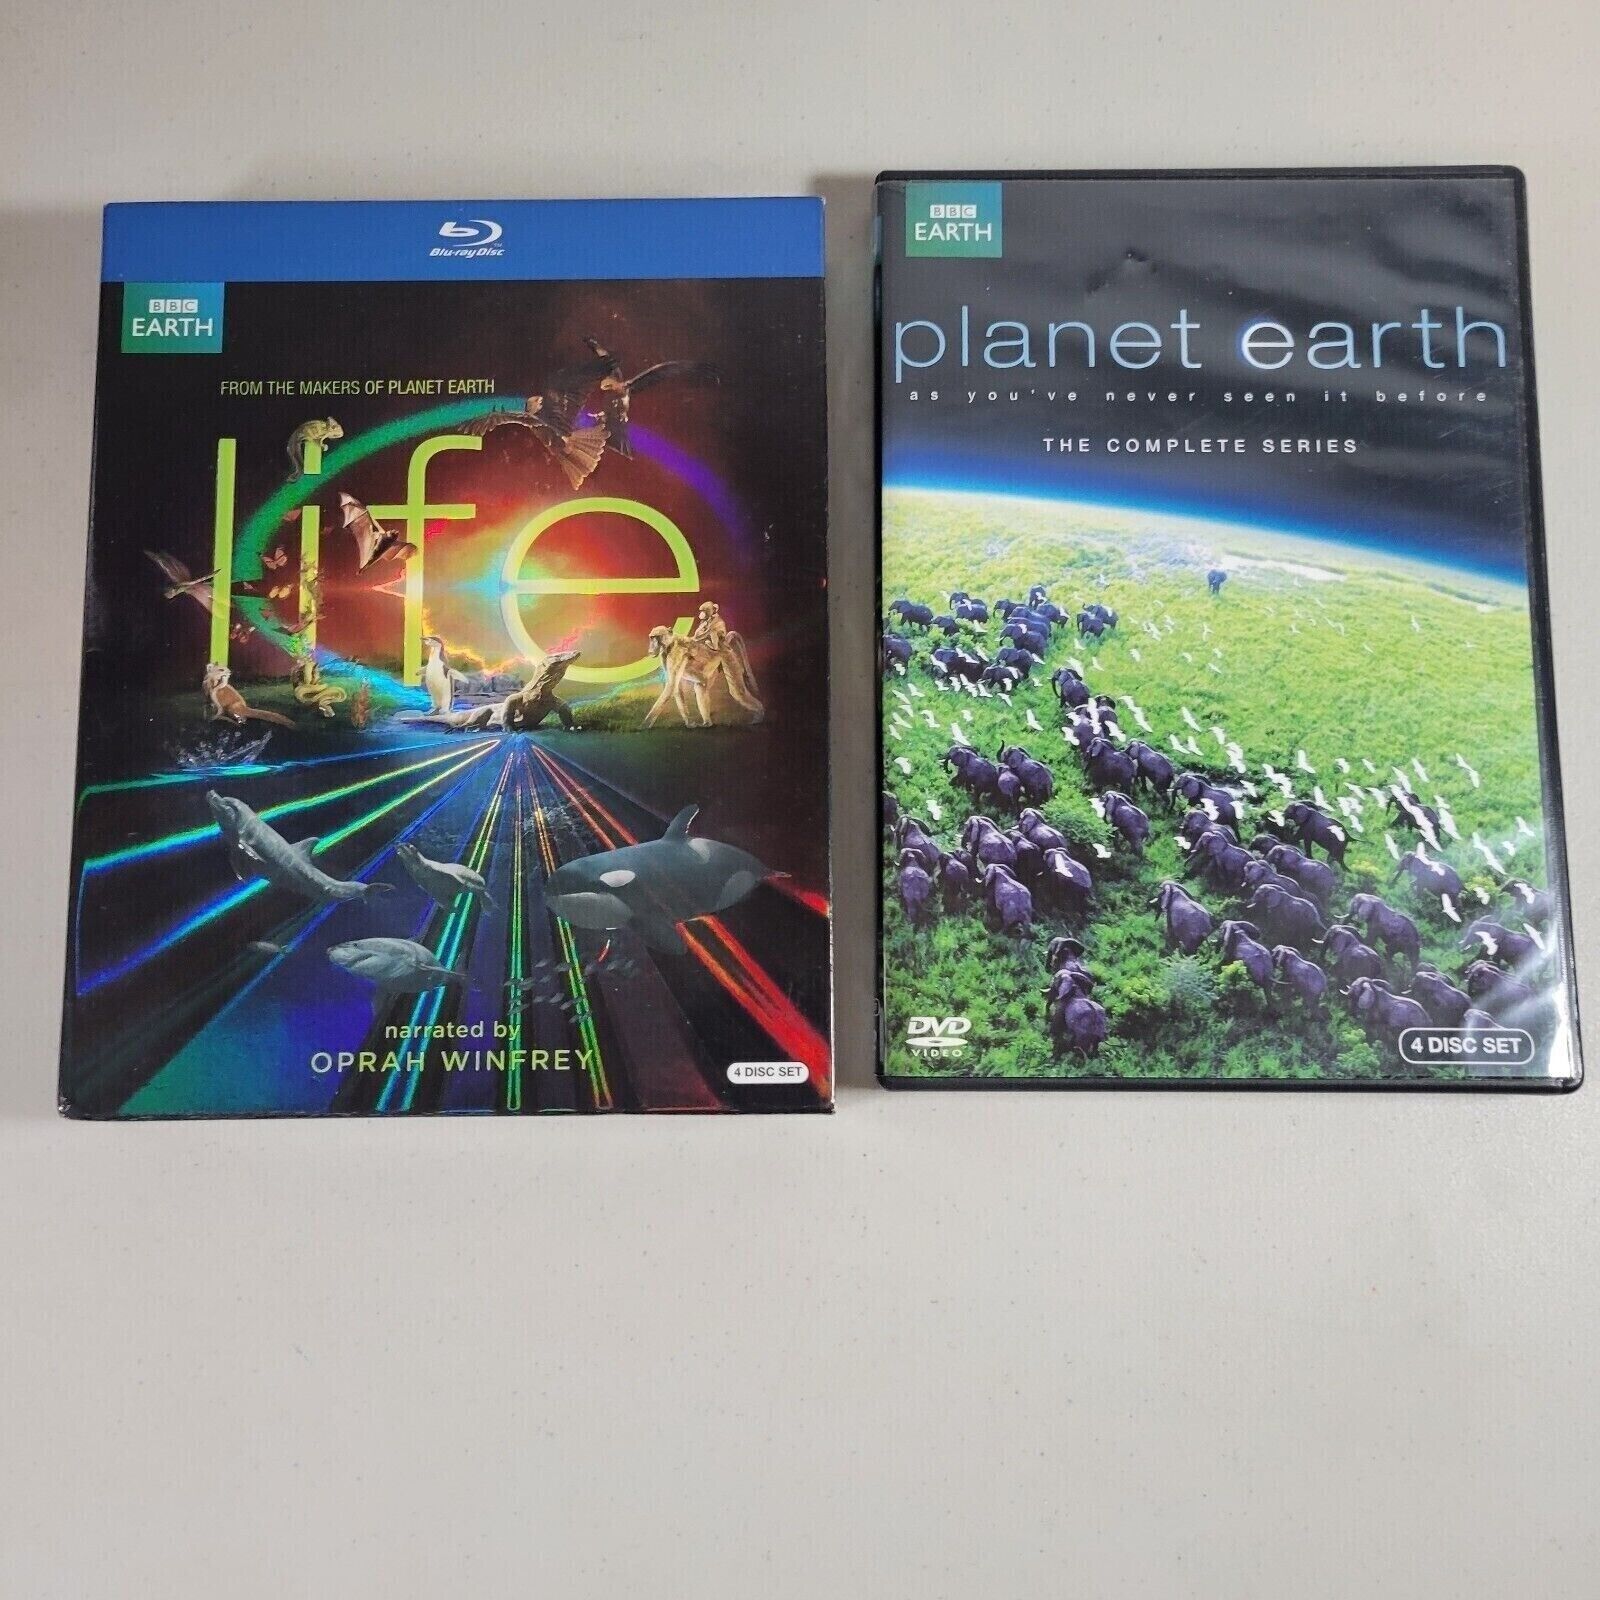 Primary image for BBC Earth Life Blu Ray 4 Disc Set Narrated by Oprah Winfrey and Planet Earth DVD